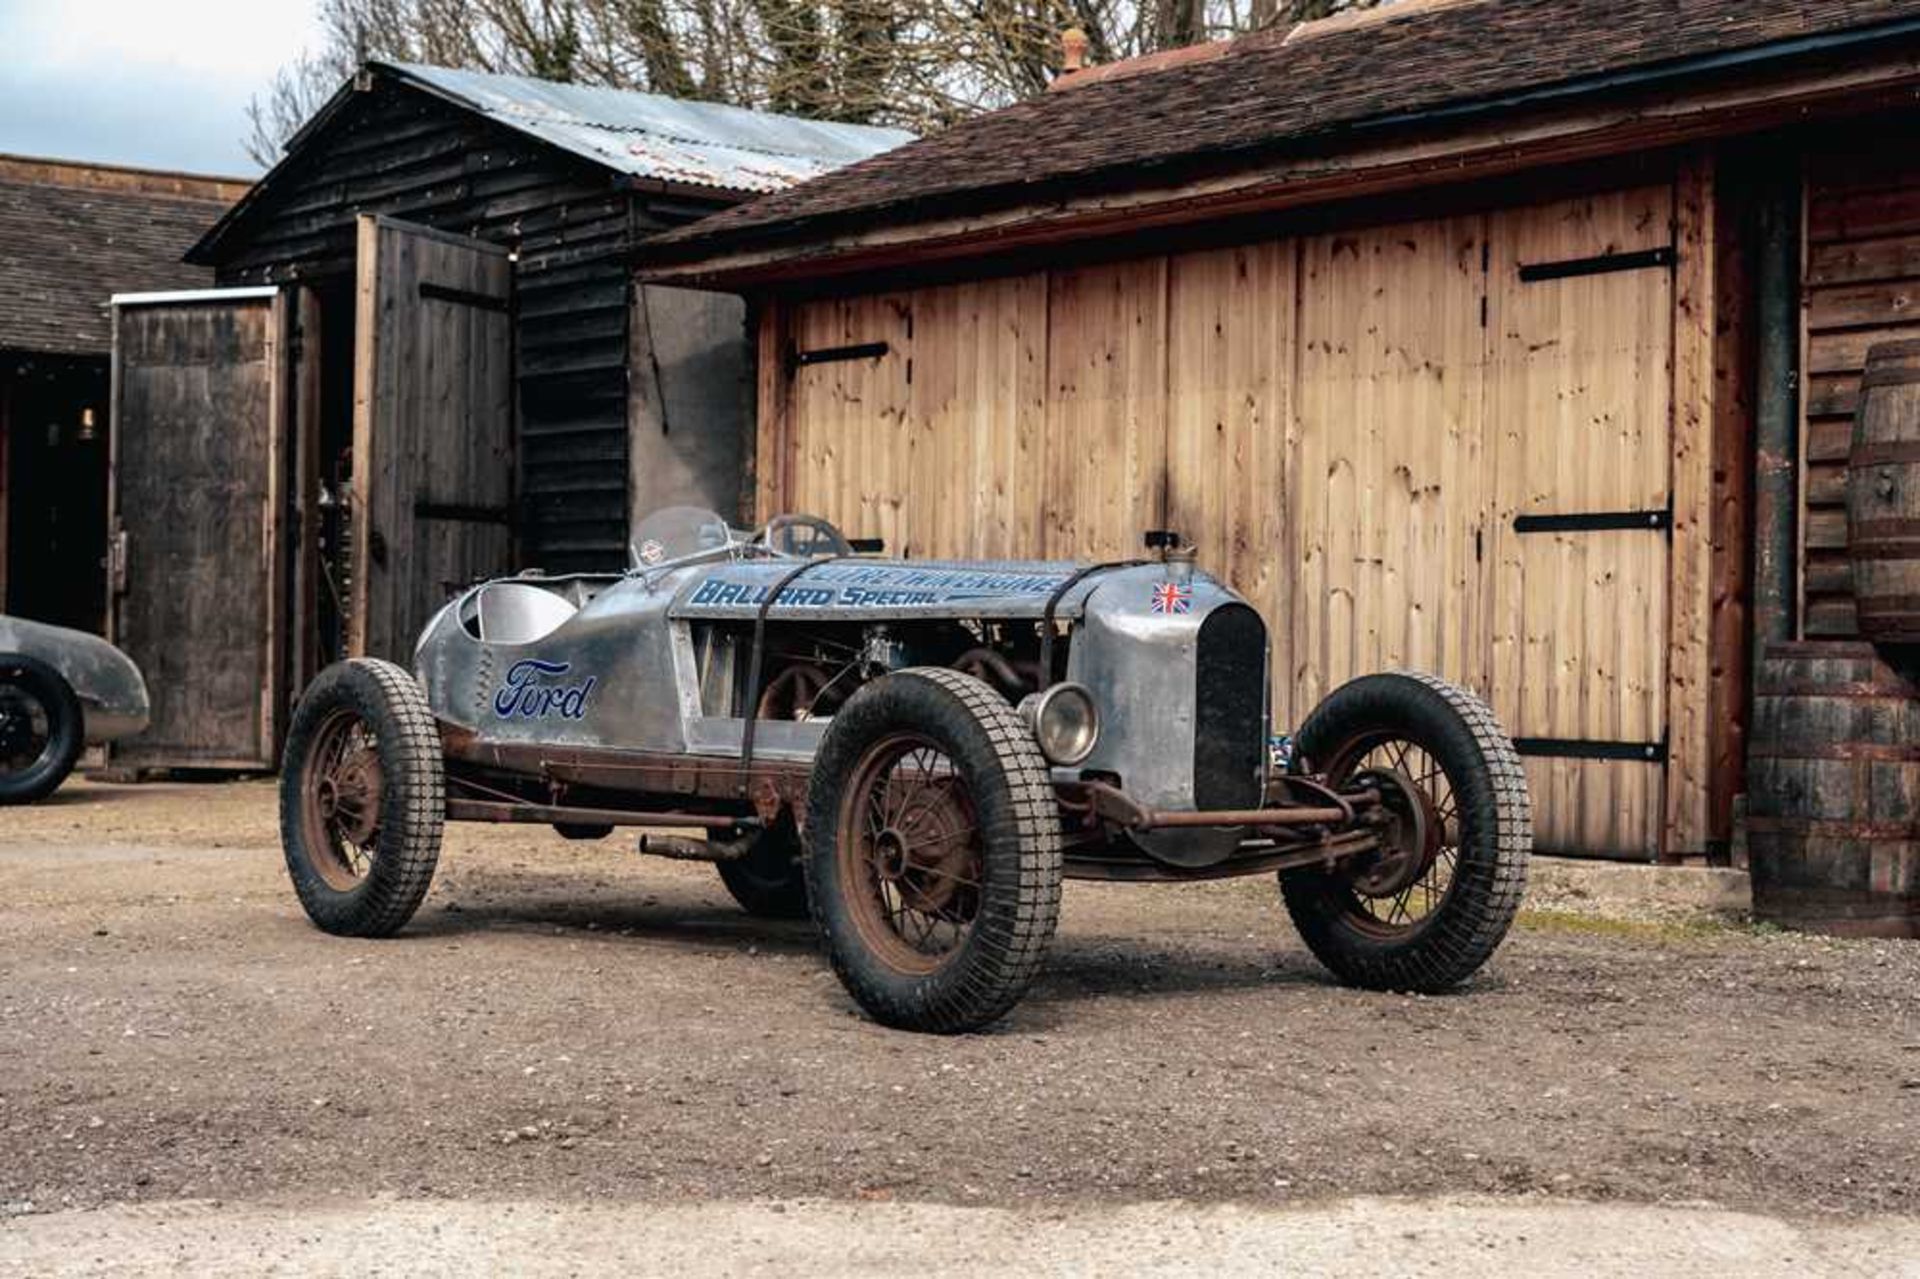 1930 Ford Model A "The Ballard Special" Speedster One off, bespoke built twin-engined pre-war racing - Image 91 of 94